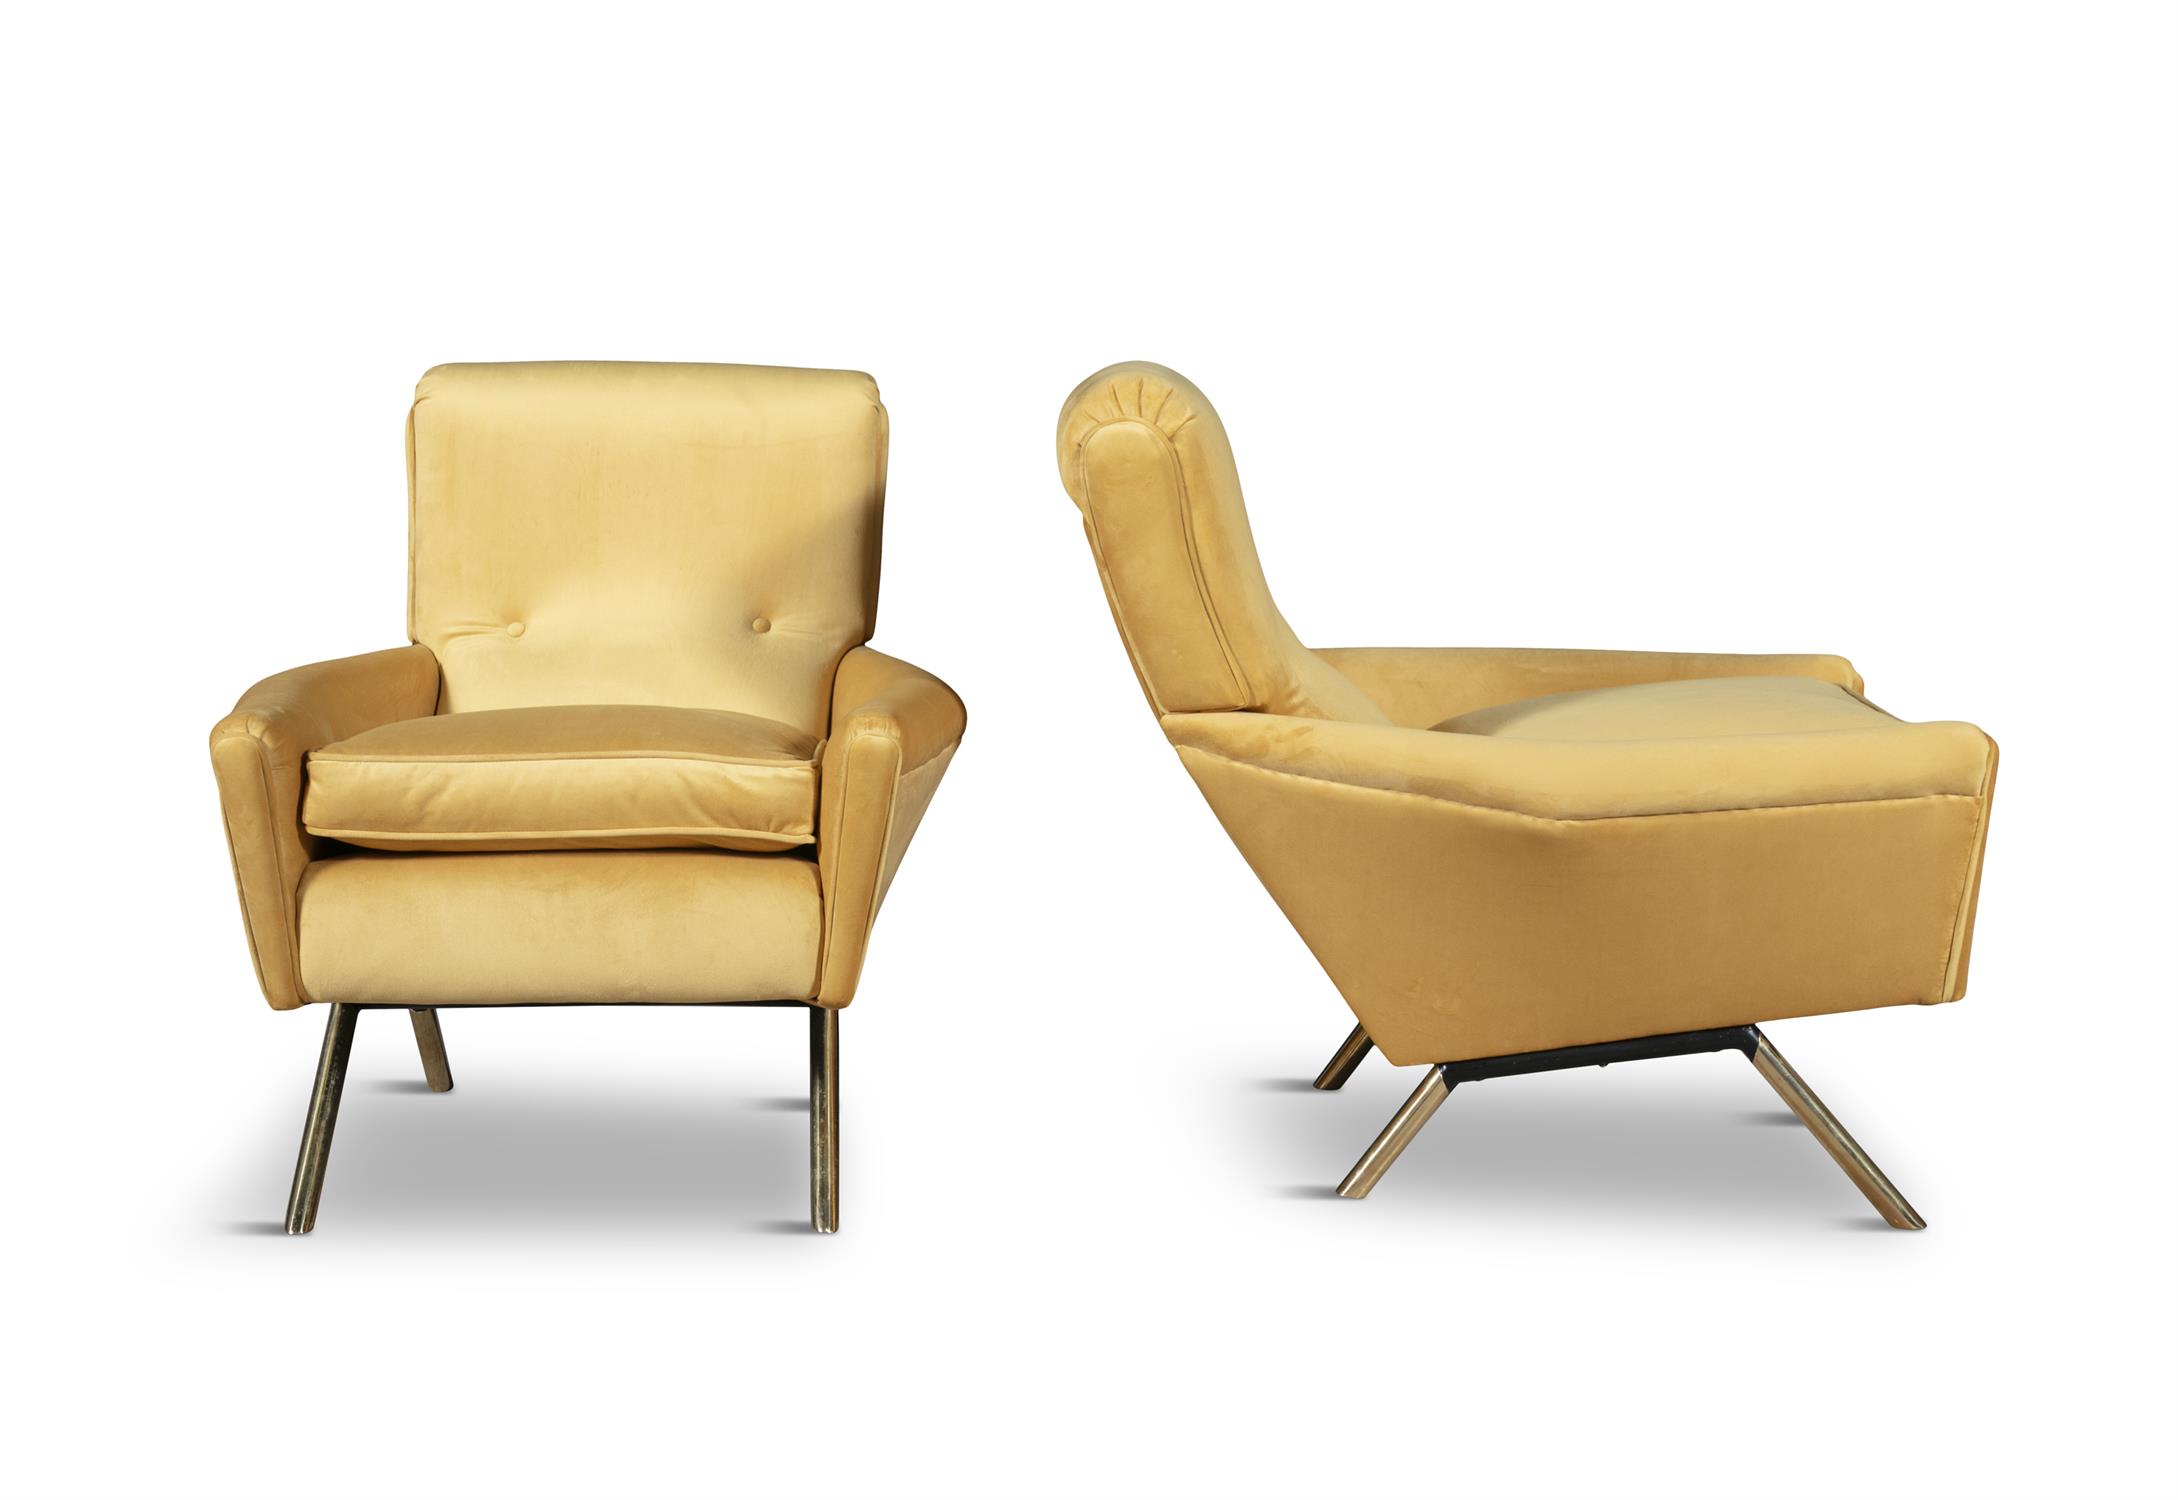 ARMCHAIRS A pair of Italian armchairs. c.1960. 78 x 96 x 85cm(h); seat 51cm (h) - Image 3 of 5